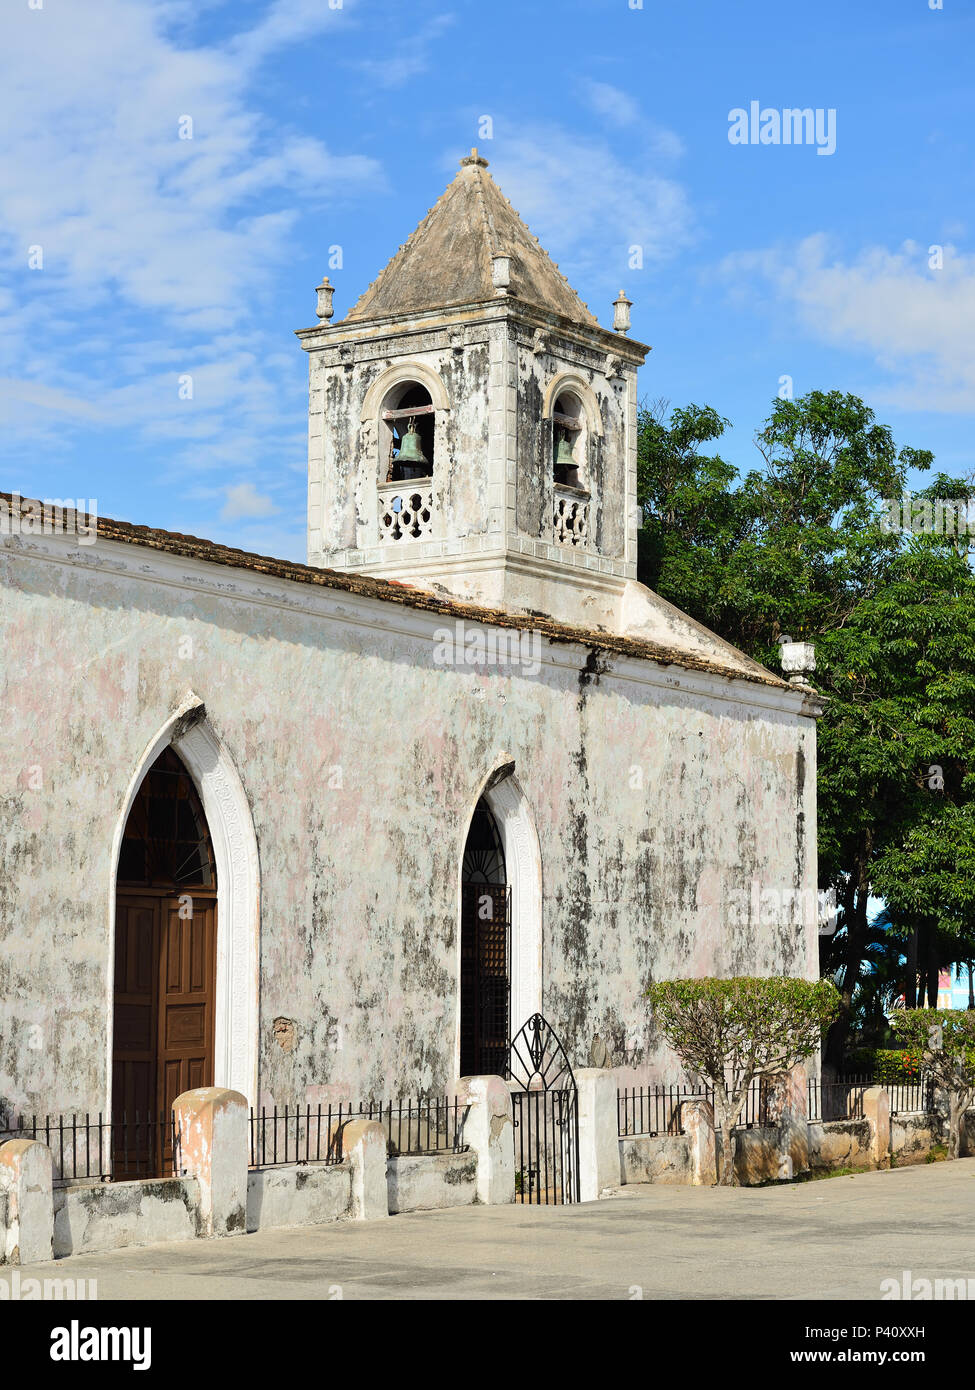 Facade of the of the  Catholic Church in the Las Tunas town on Cuba Stock Photo